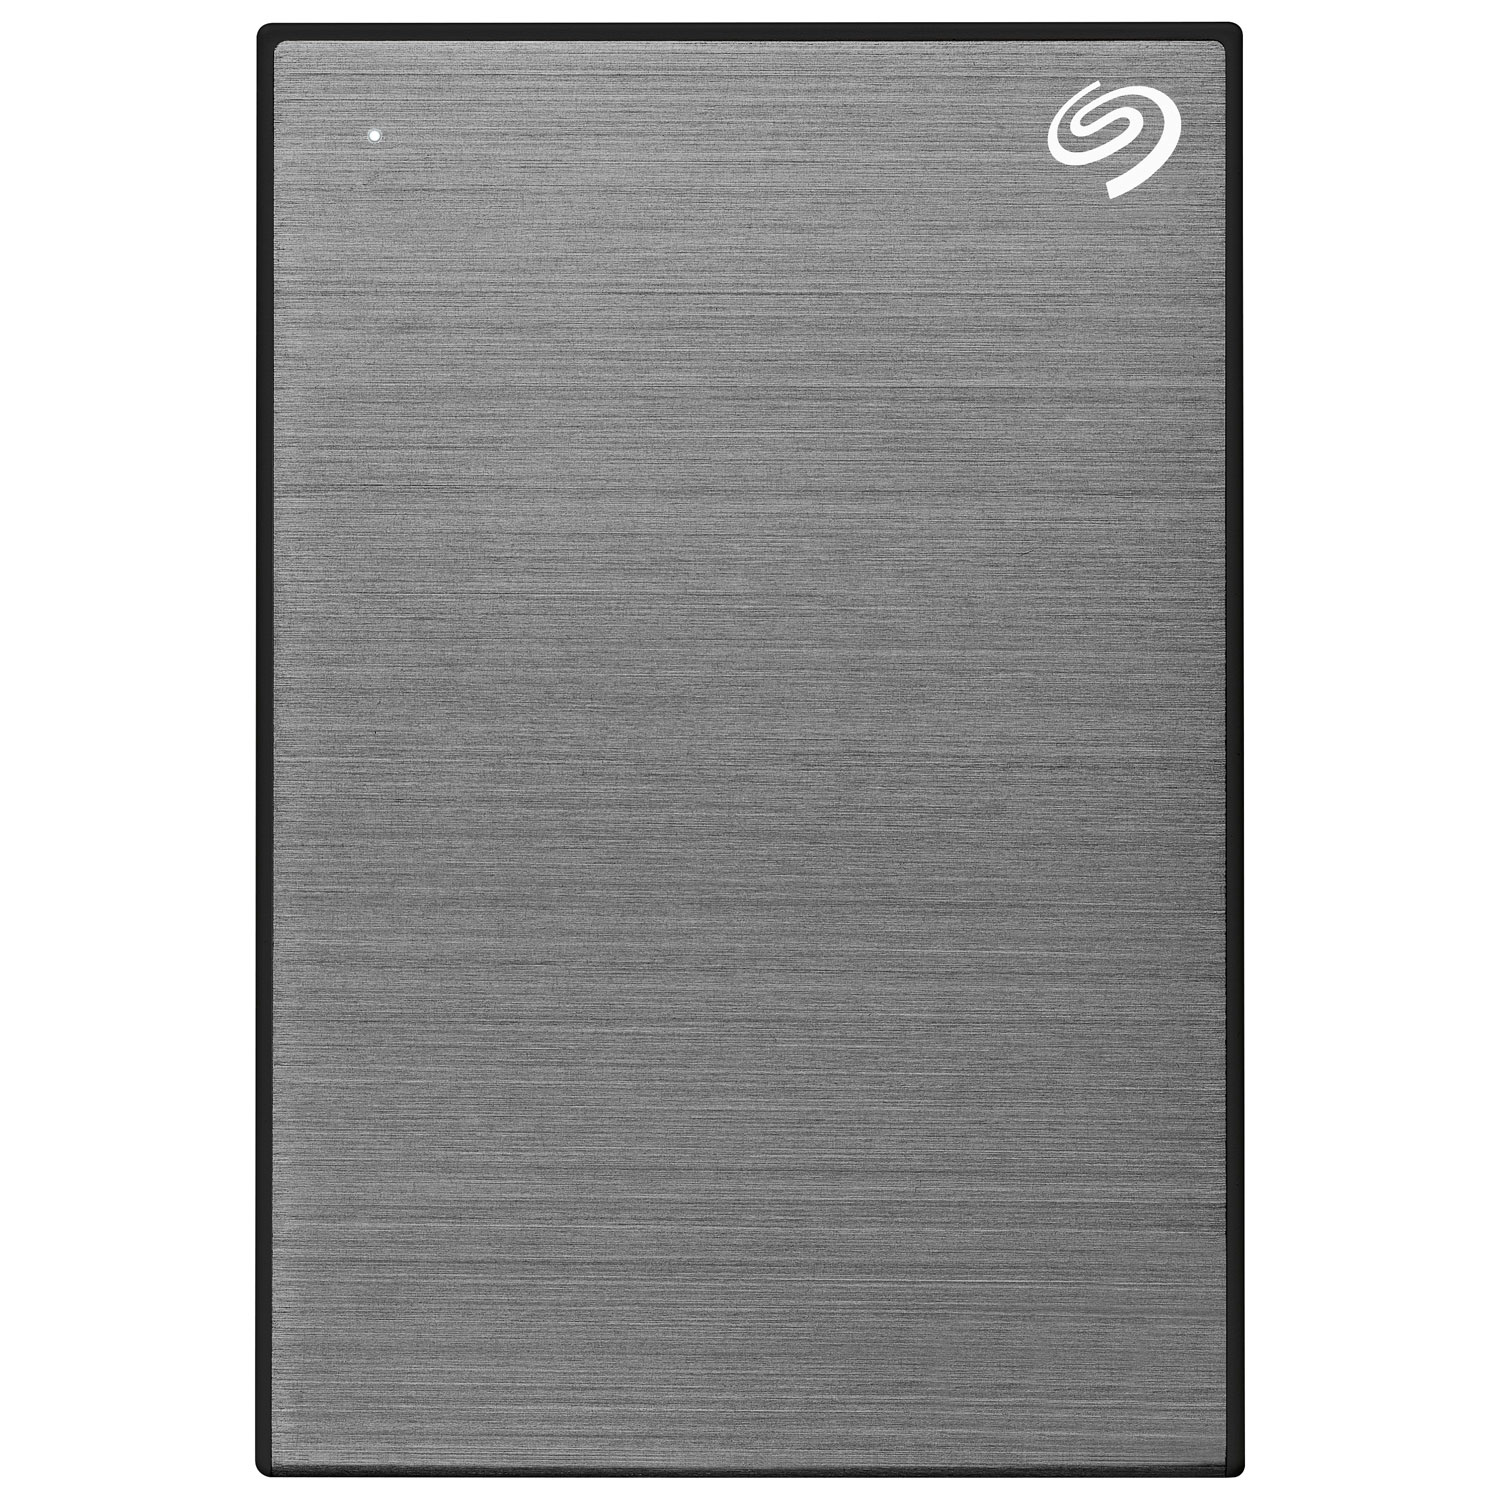 Seagate One Touch 5TB USB 3.0 Portable External Hard Drive (STKZ5000404) - Space Grey